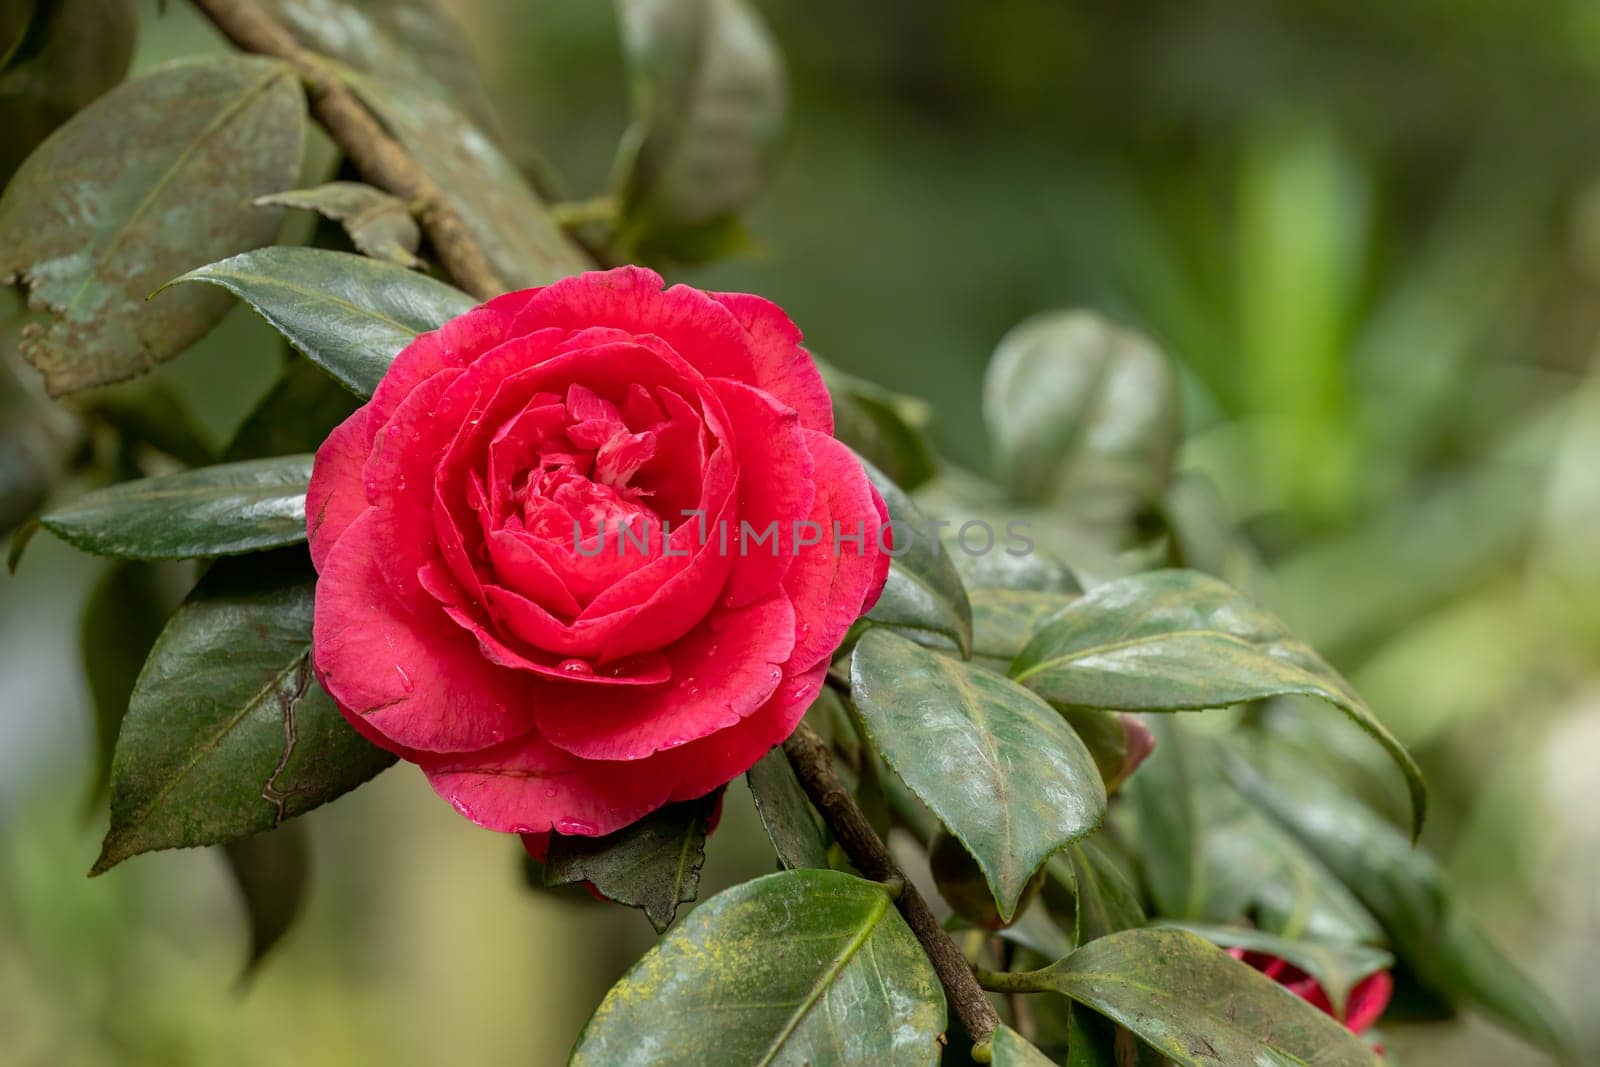 Rose flower on a leafy plant with lots of green leaves by exndiver